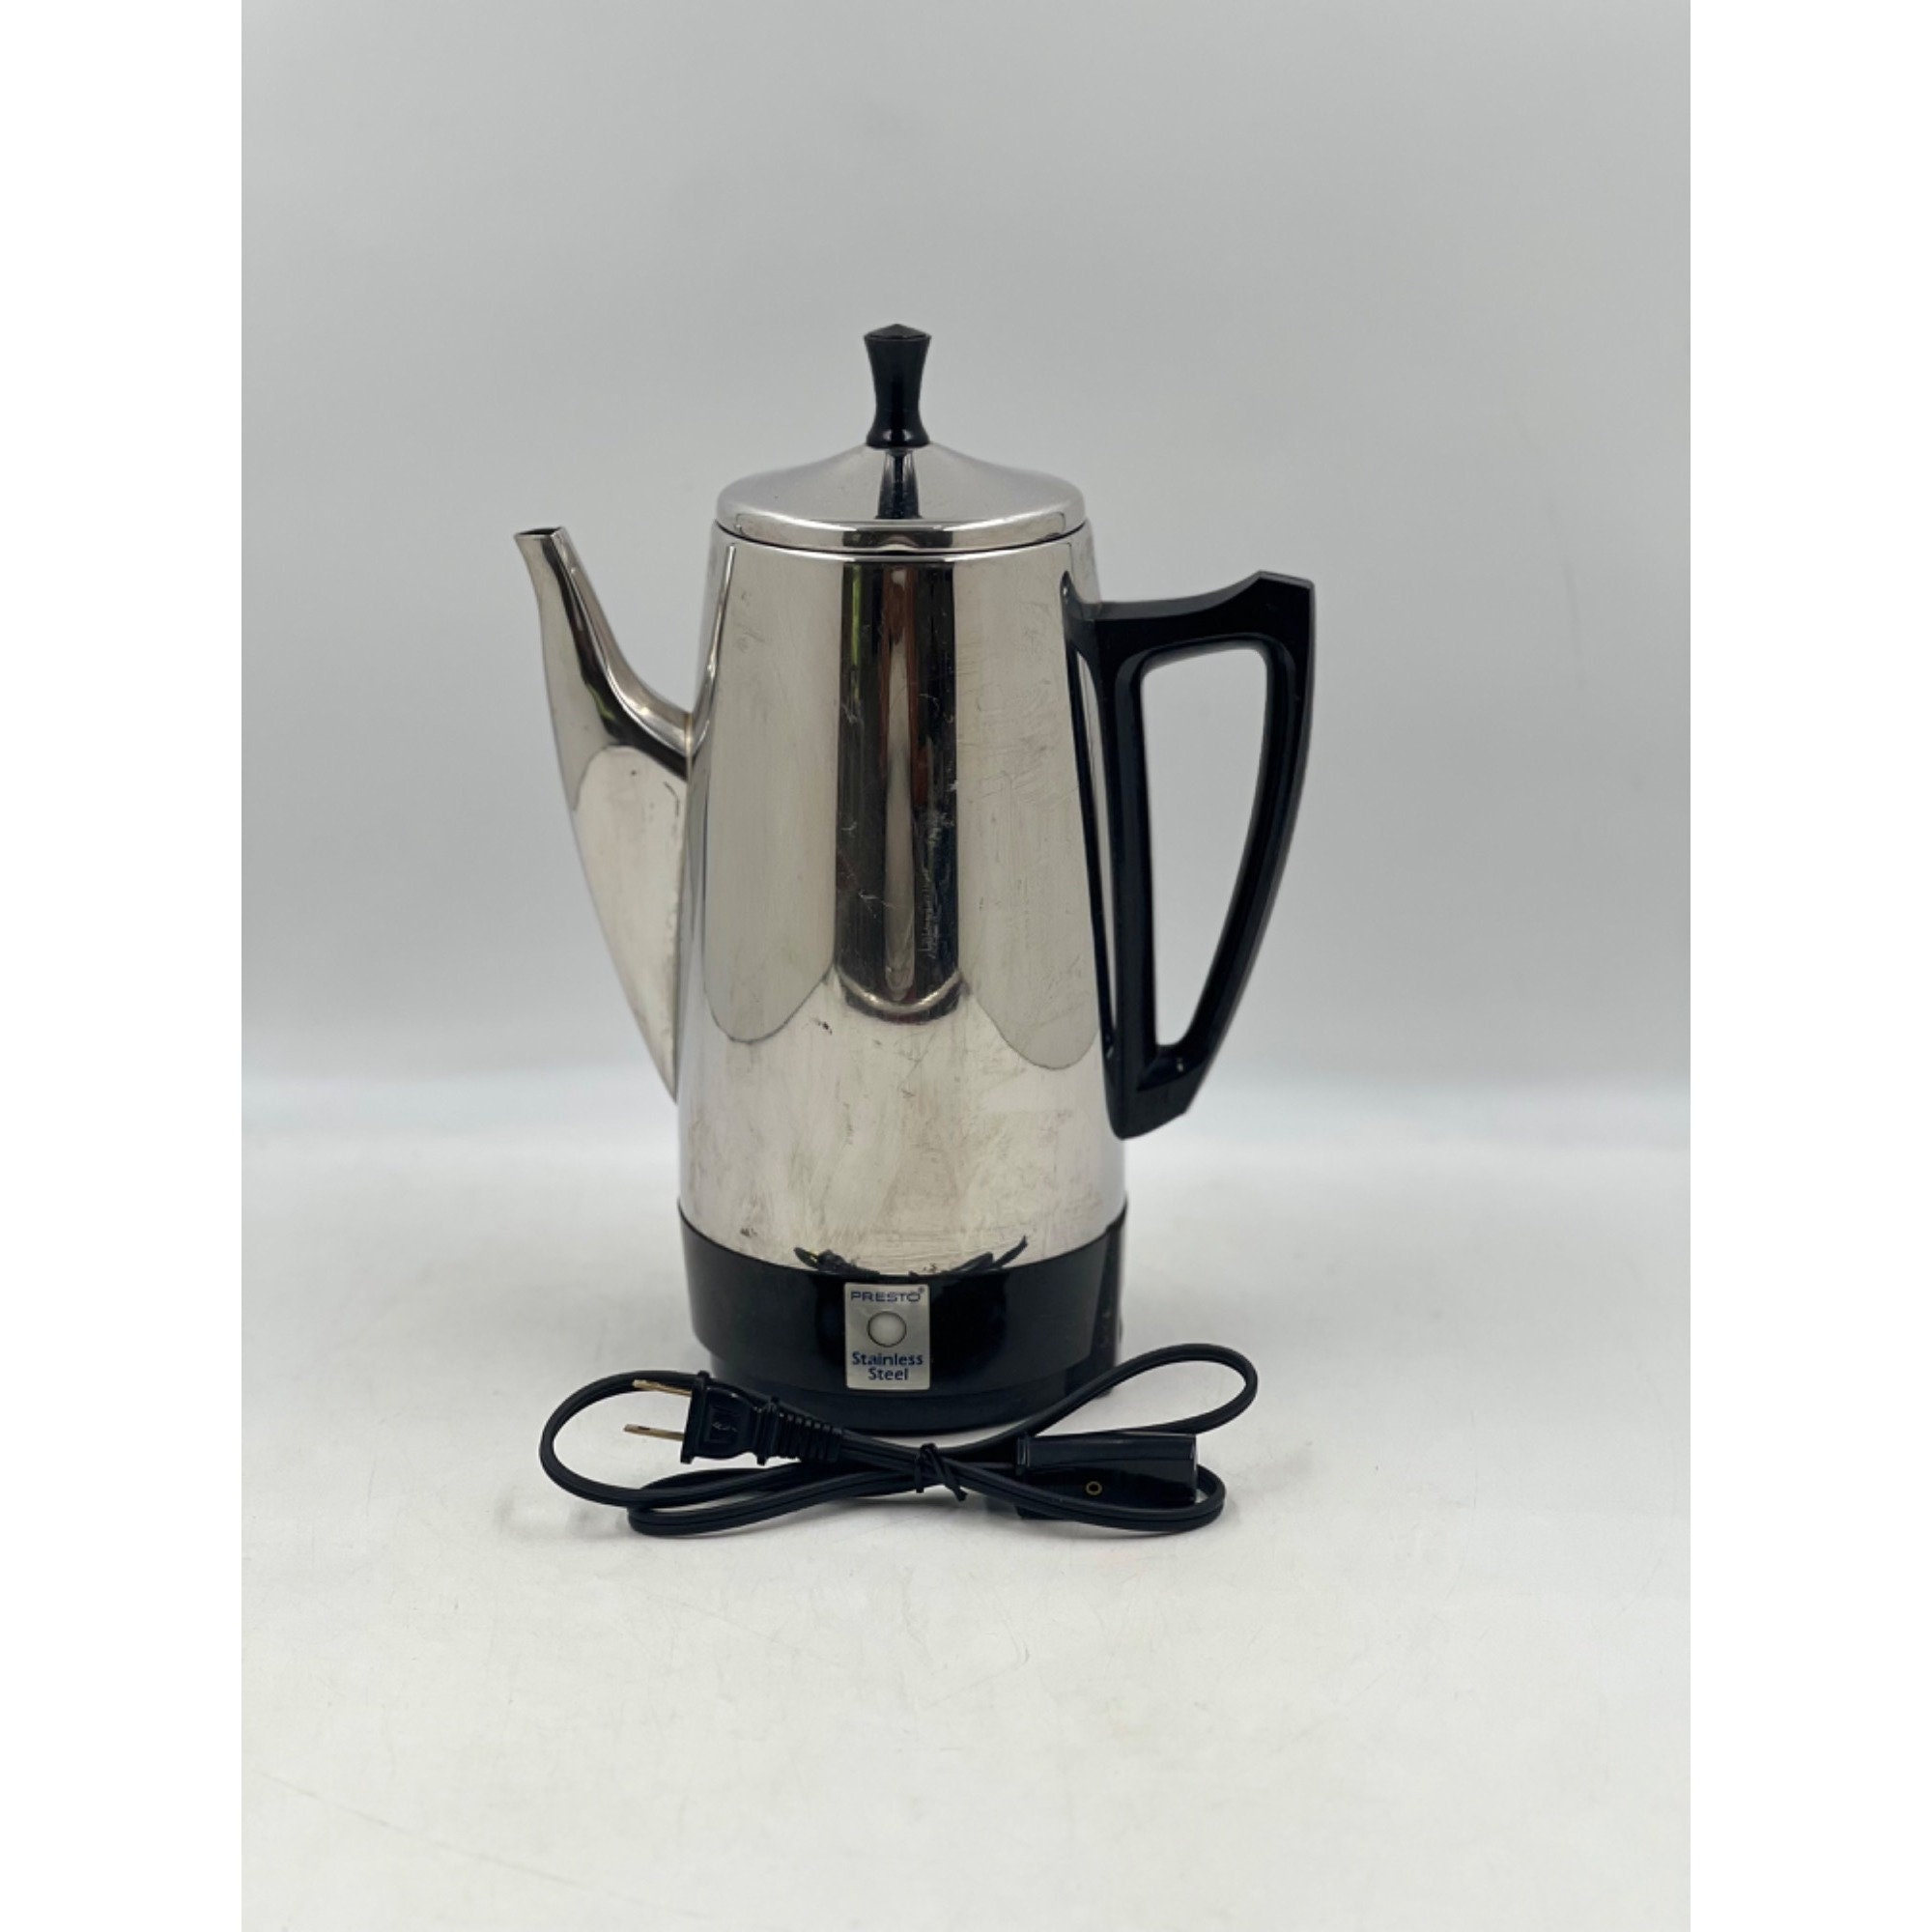 Presto Percolator Coffee Pot Stainless Steel 2 to 12 Cups Model 0281104  Tested